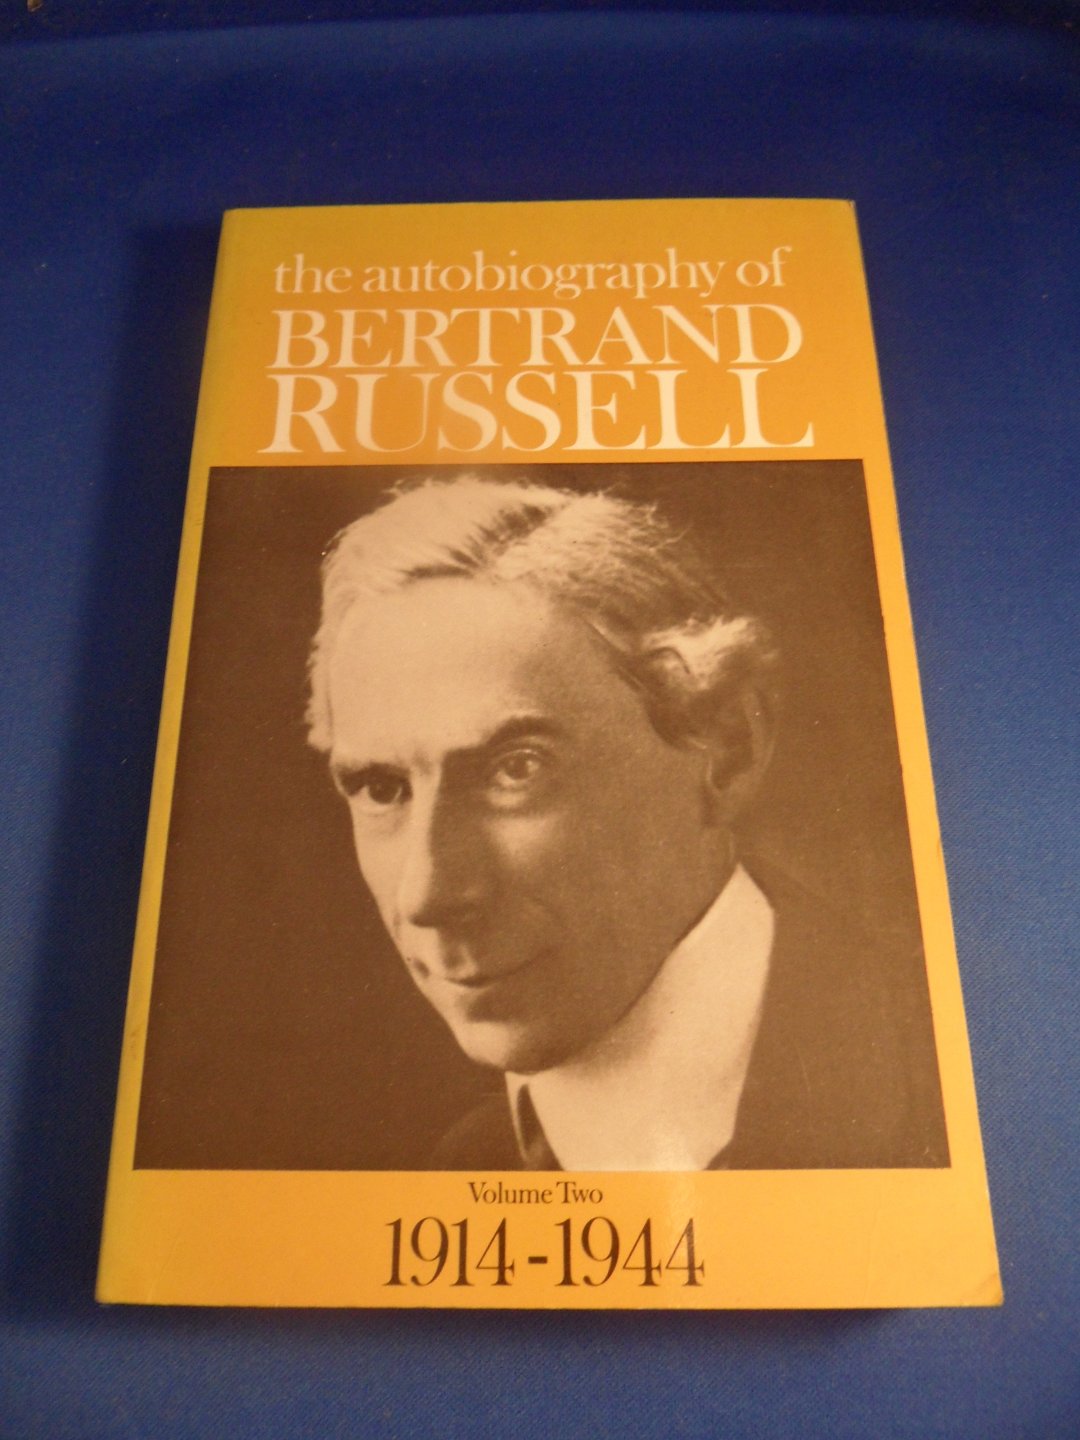 Russell, Bertrand - The Autobiography of Bertrand Russell Volume Two 1914-1944